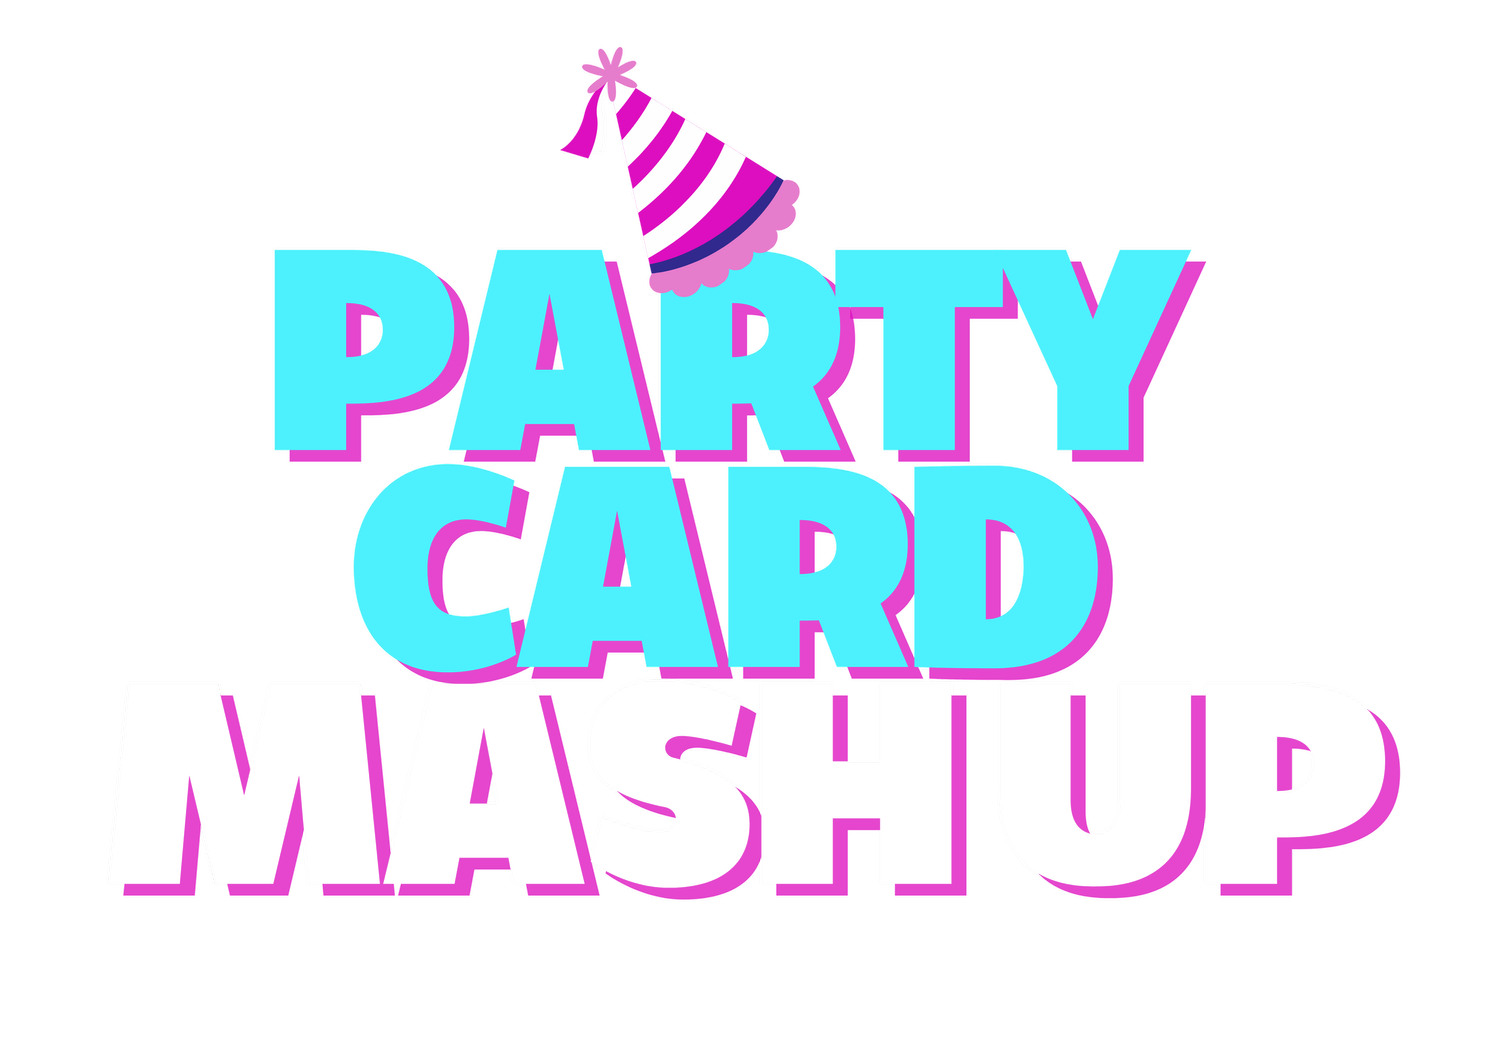 PARTY CARD MASH UP